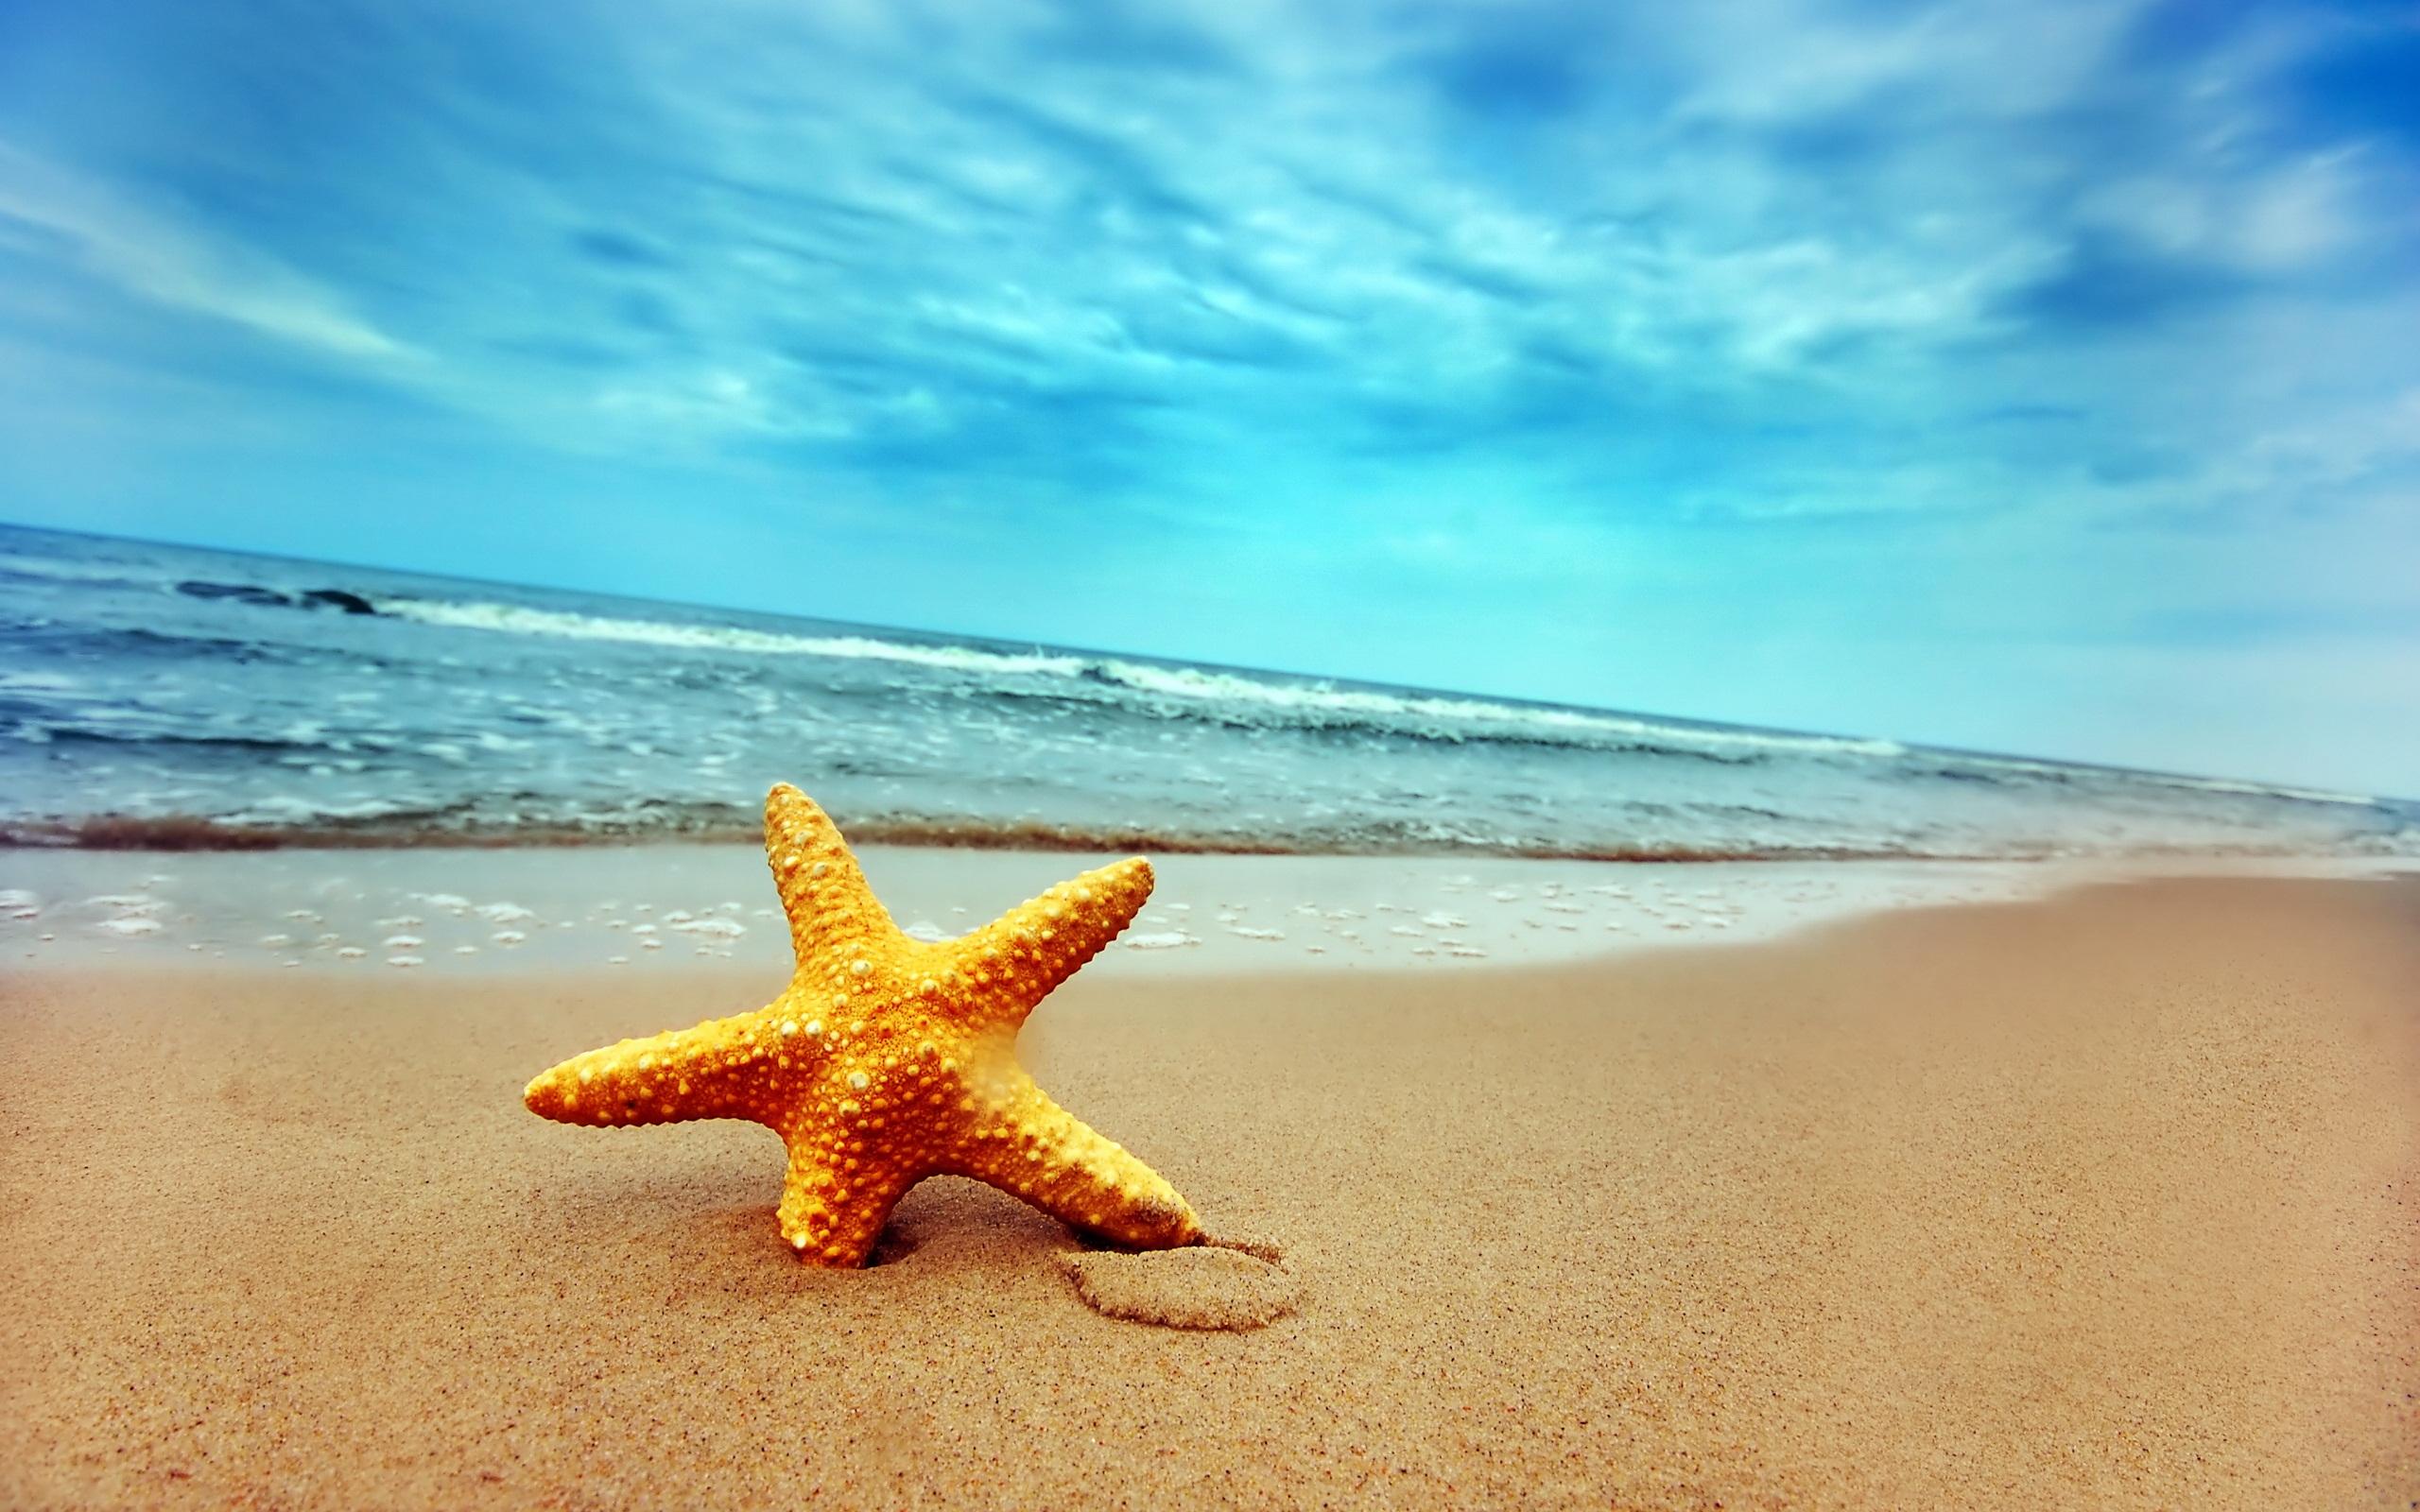 A starfish on the beach with the ocean in the background - Starfish